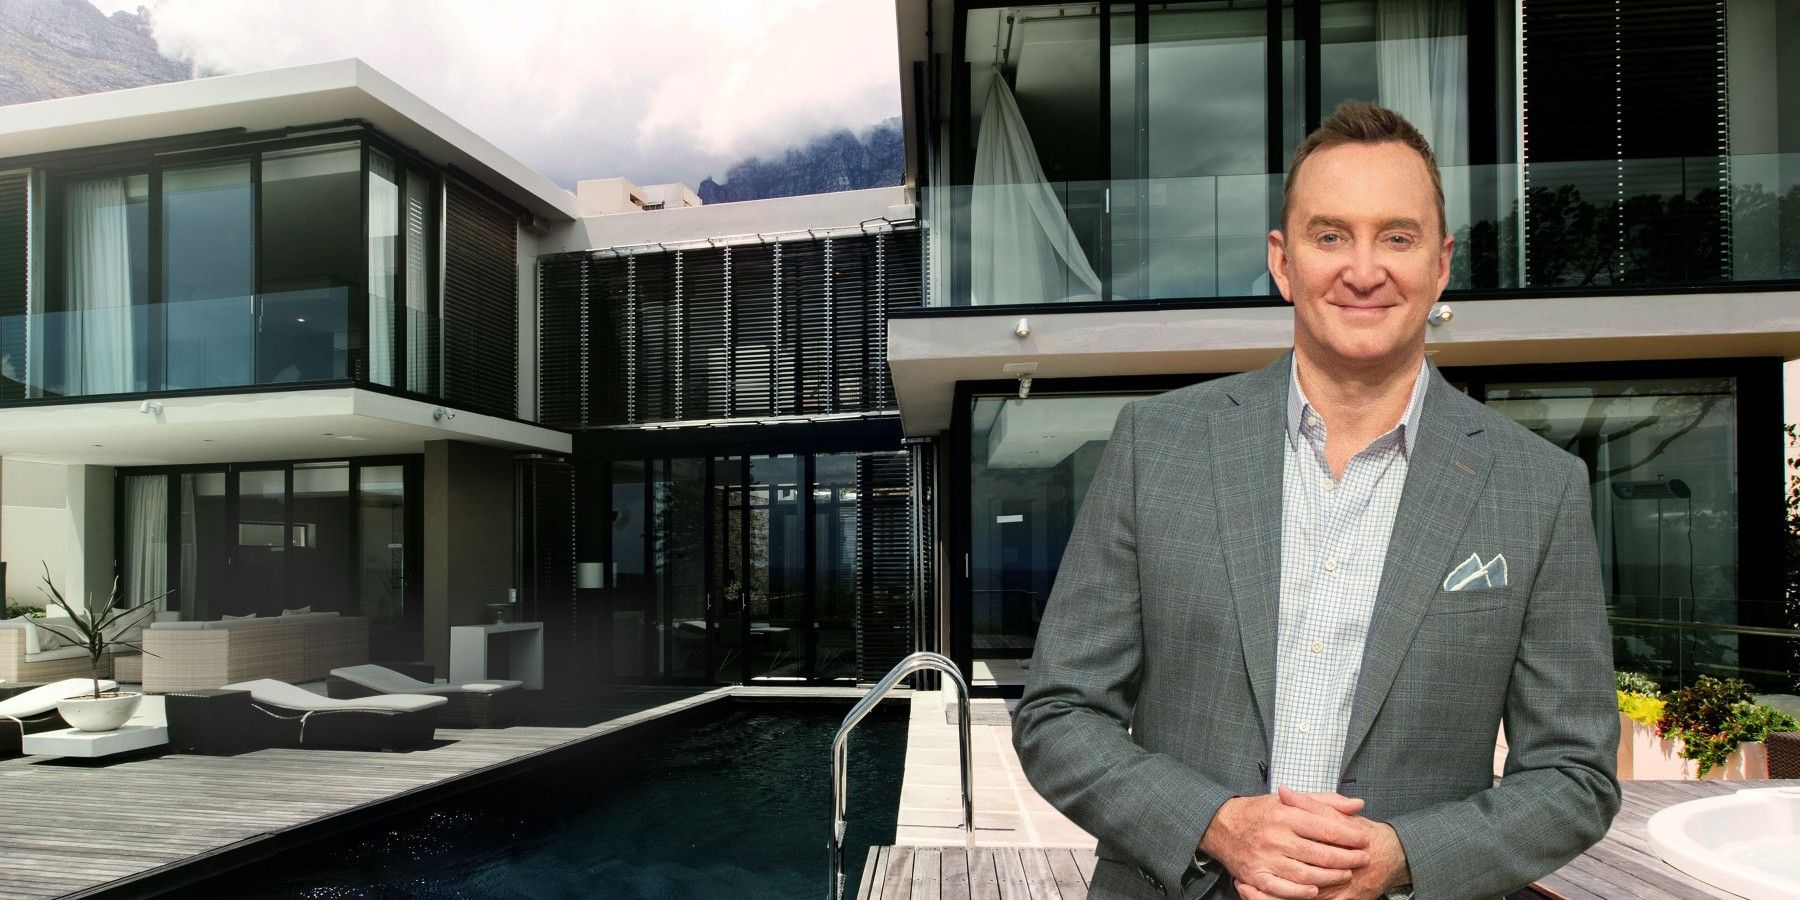 clinton kelly stars in self-made mansions